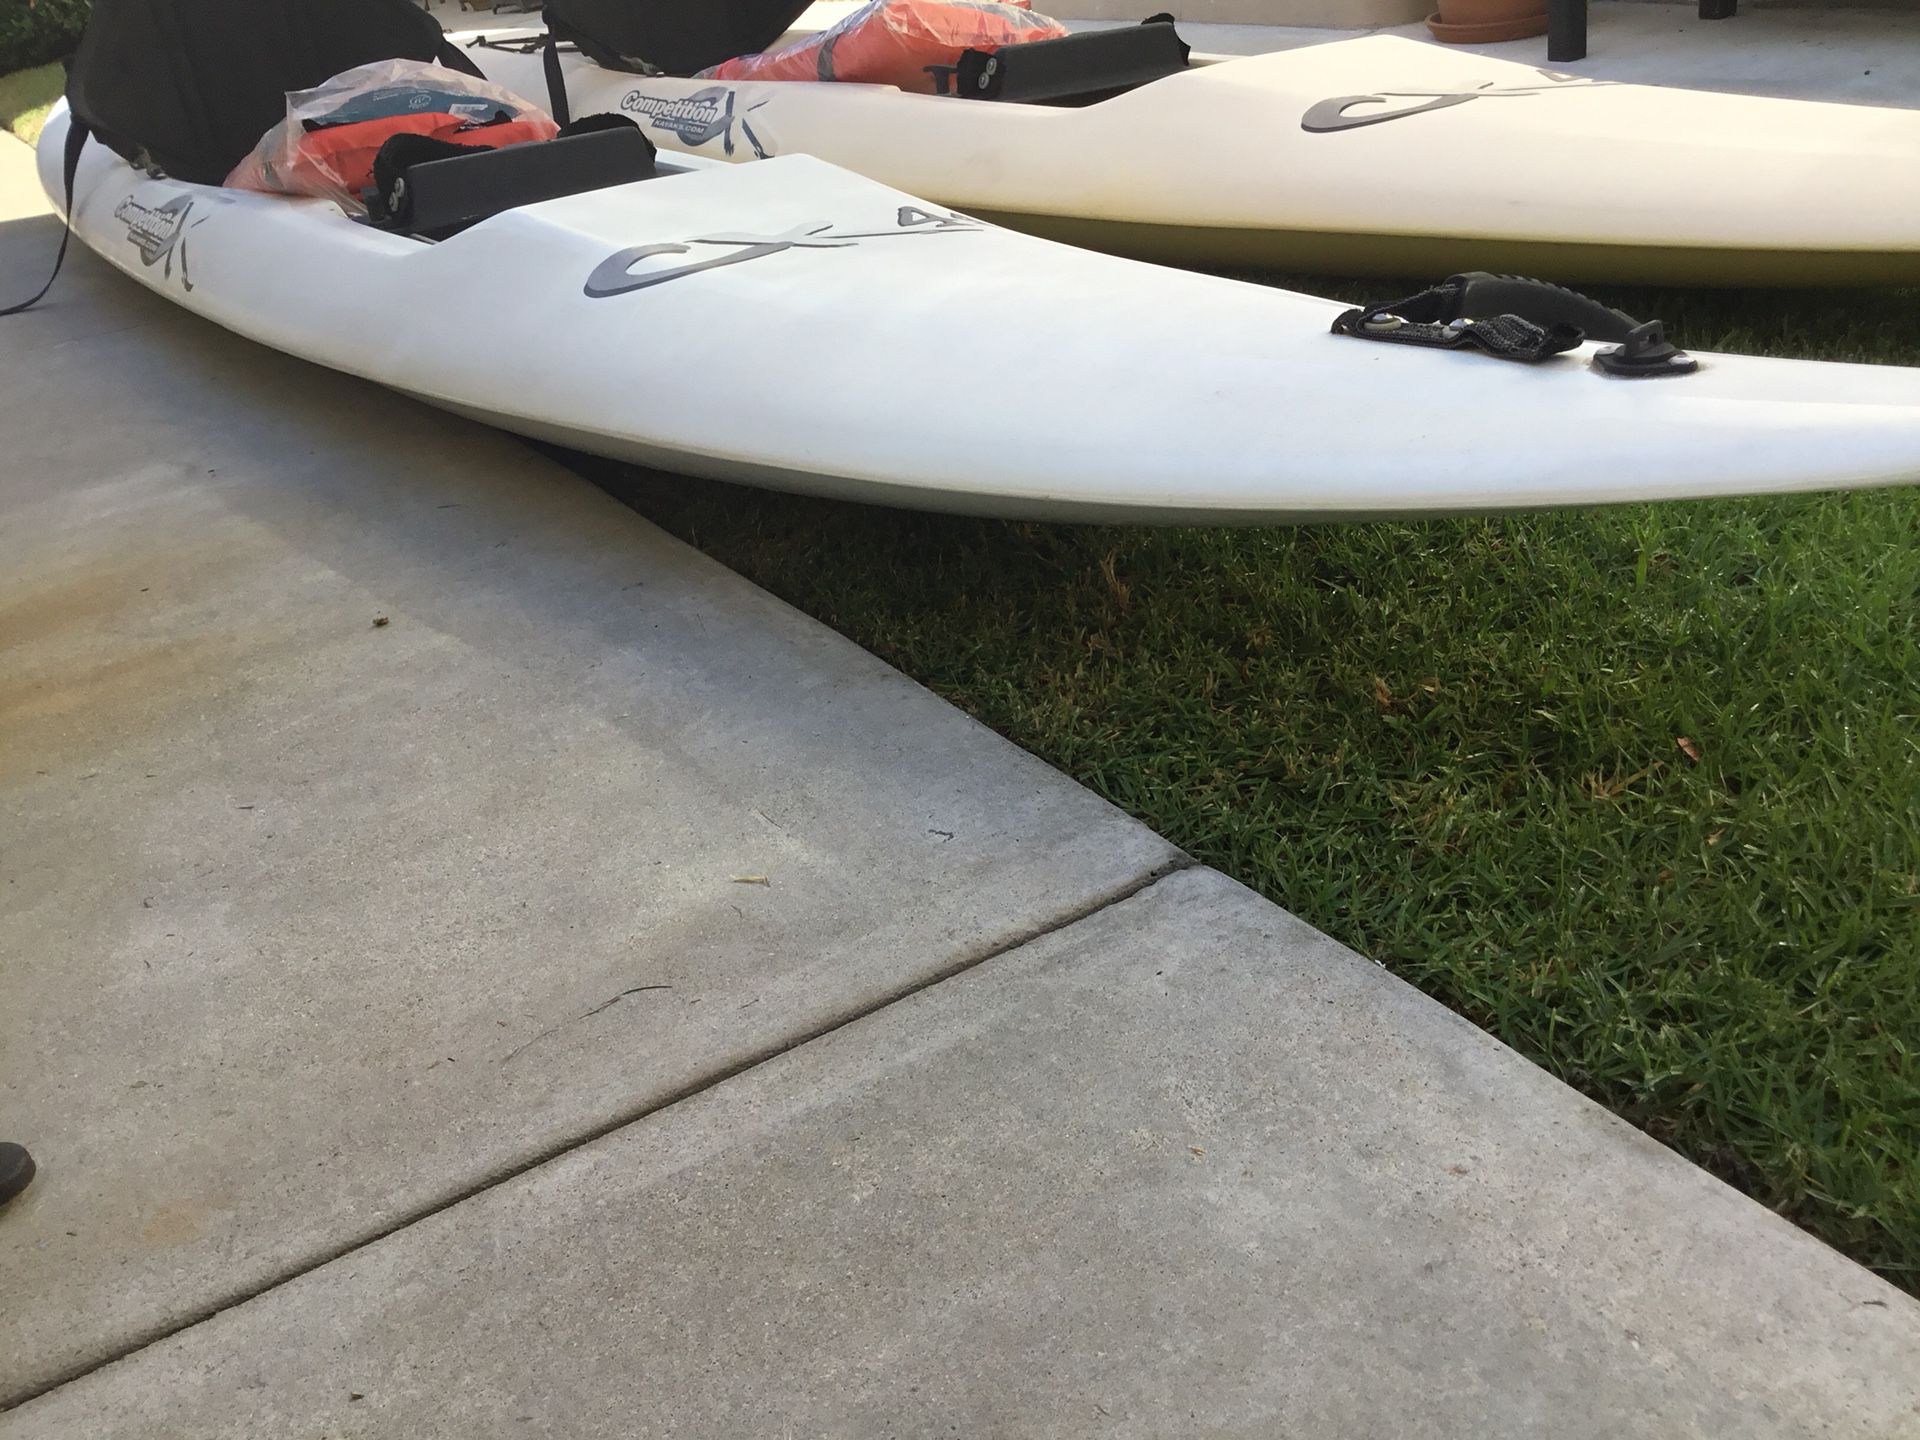 2 Competition Kayaks ~ CK 4.4 for Sale in Long Beach, CA - OfferUp